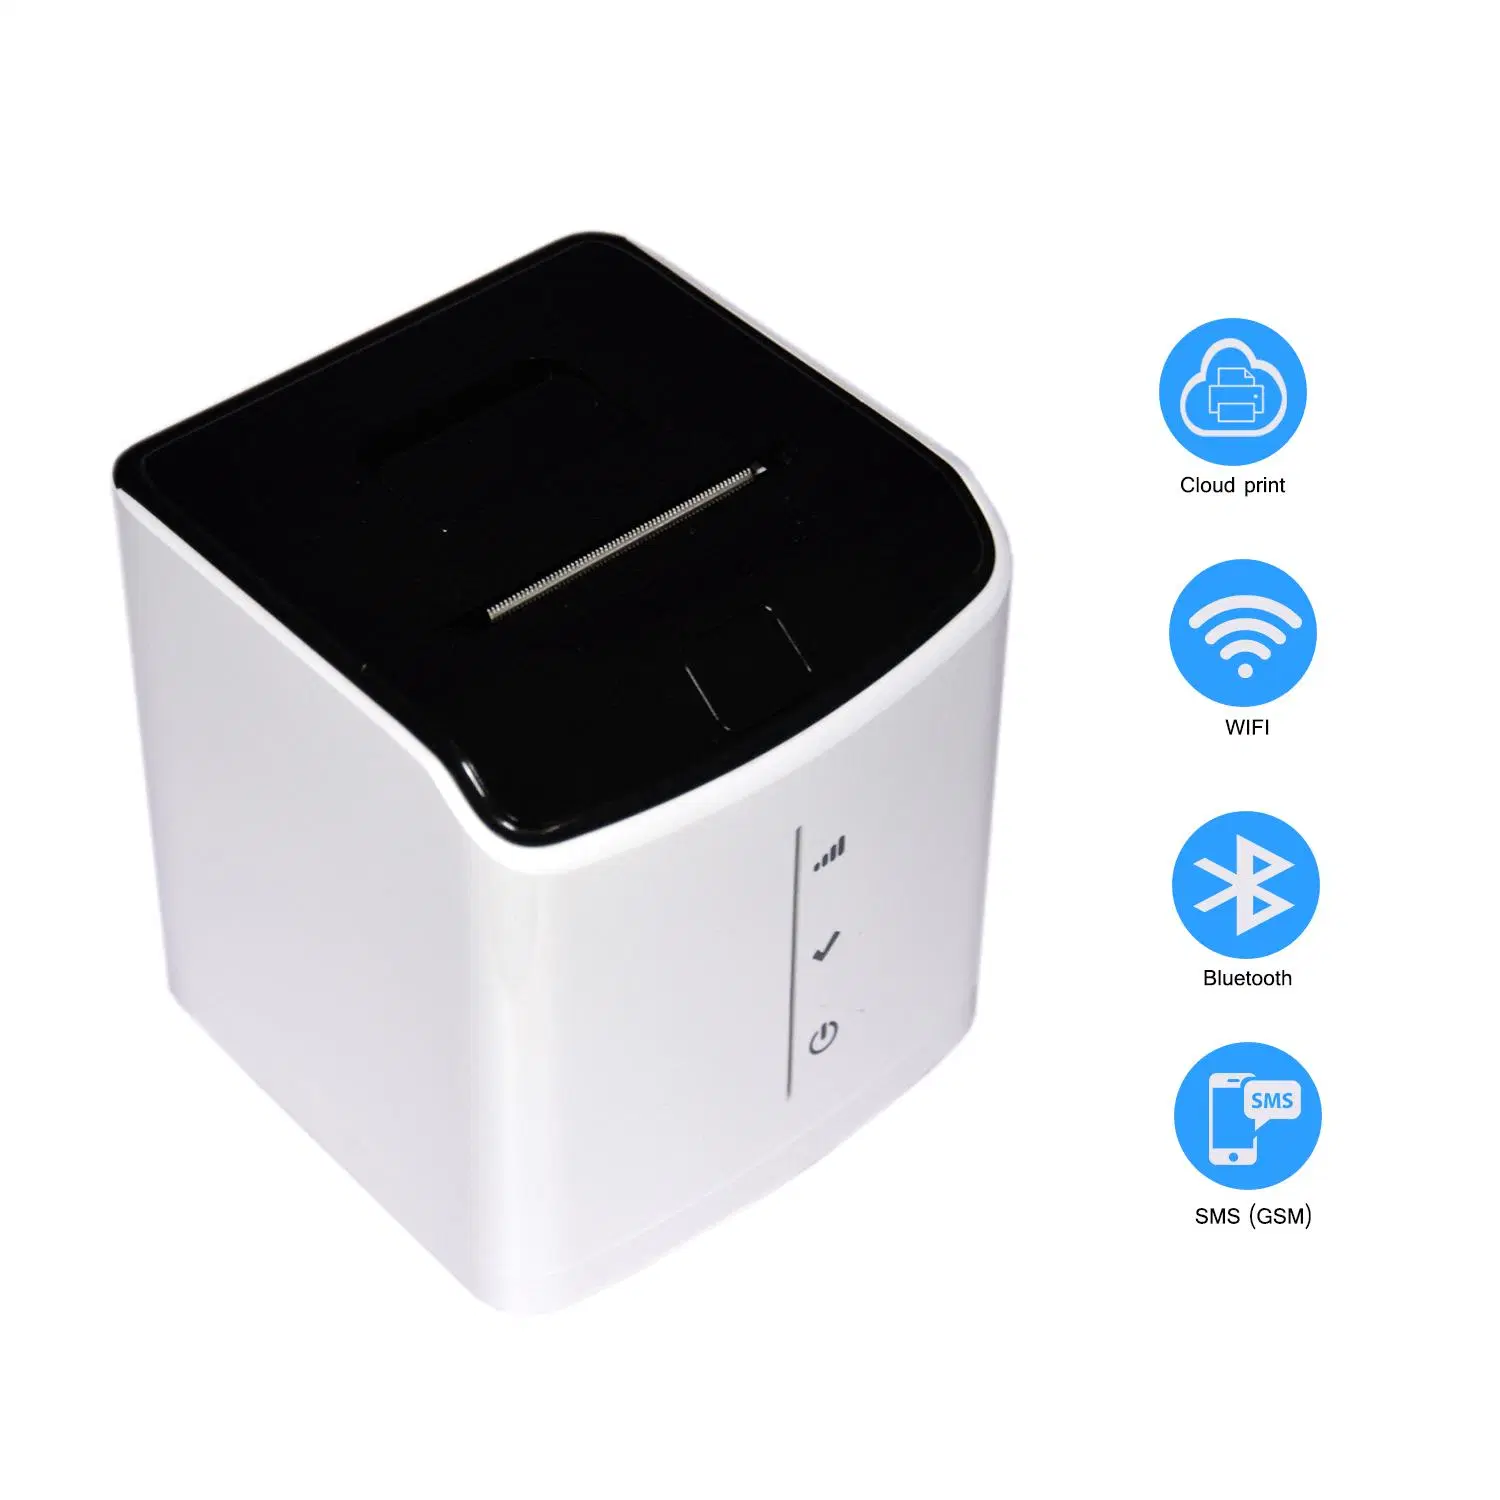 2 Inch Bluetooth Thermal POS Receipt Printer Support Cloud Printing (POS58D)